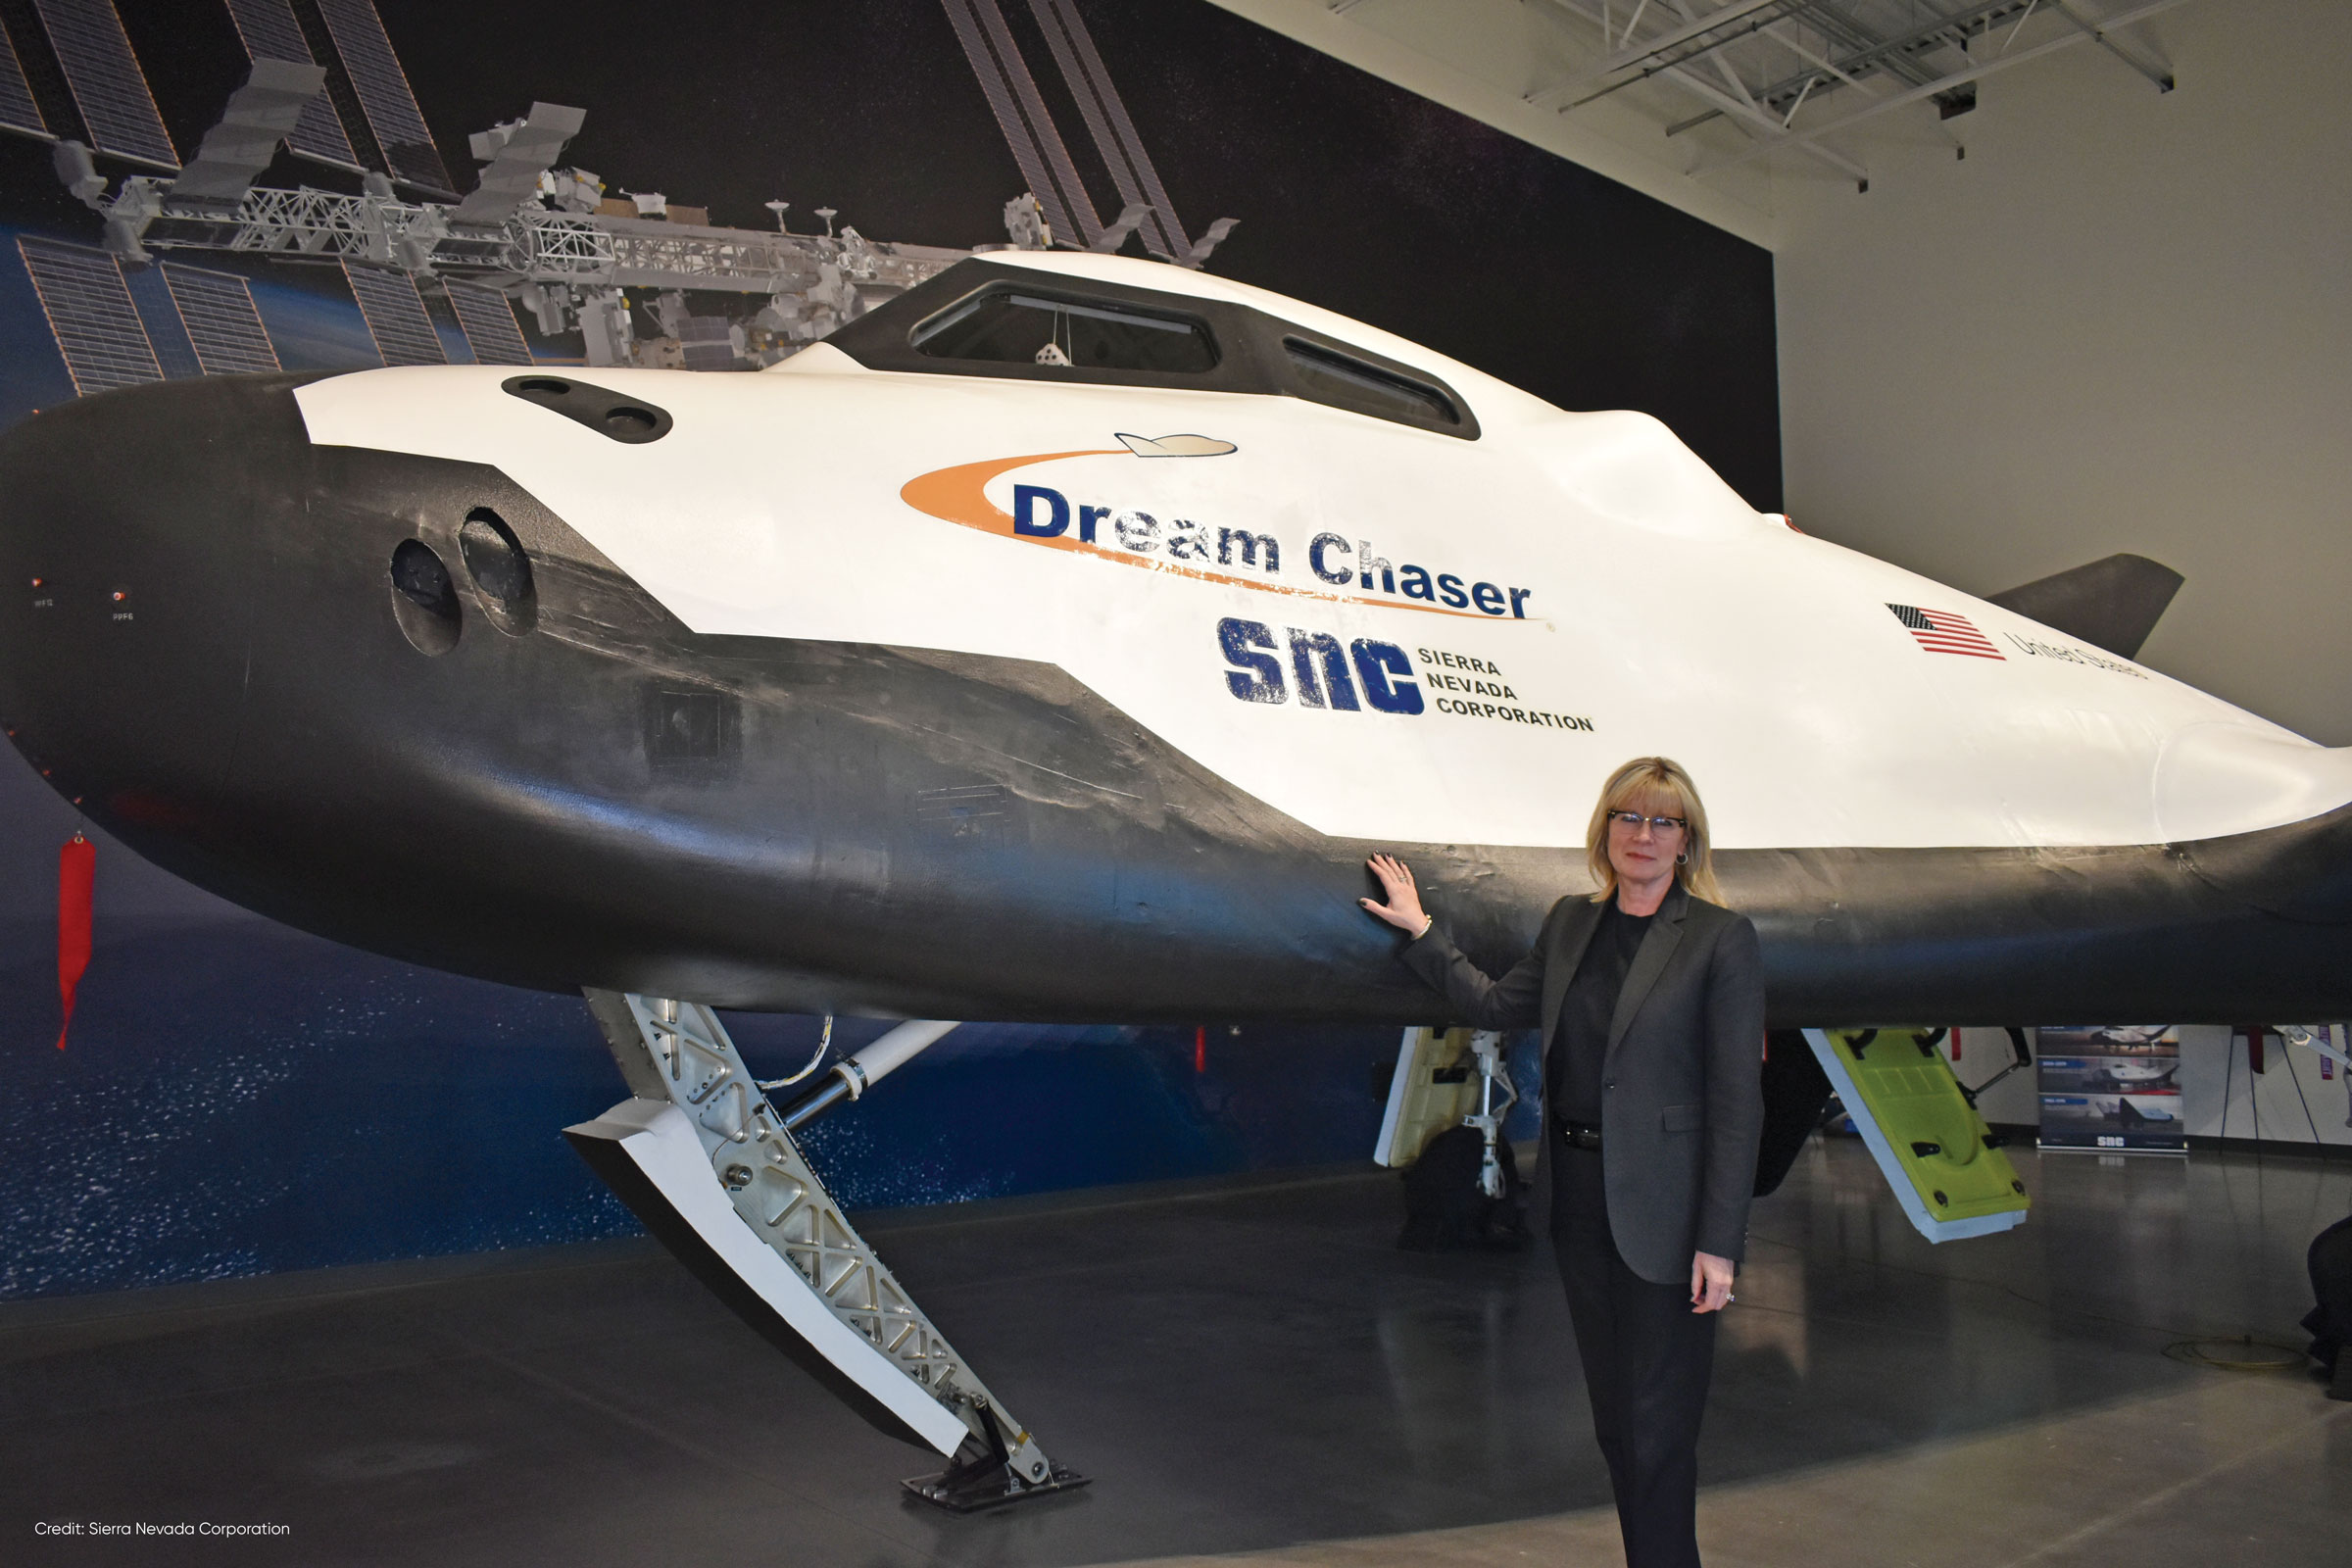 Pat Remias stands before the Dream Chaser